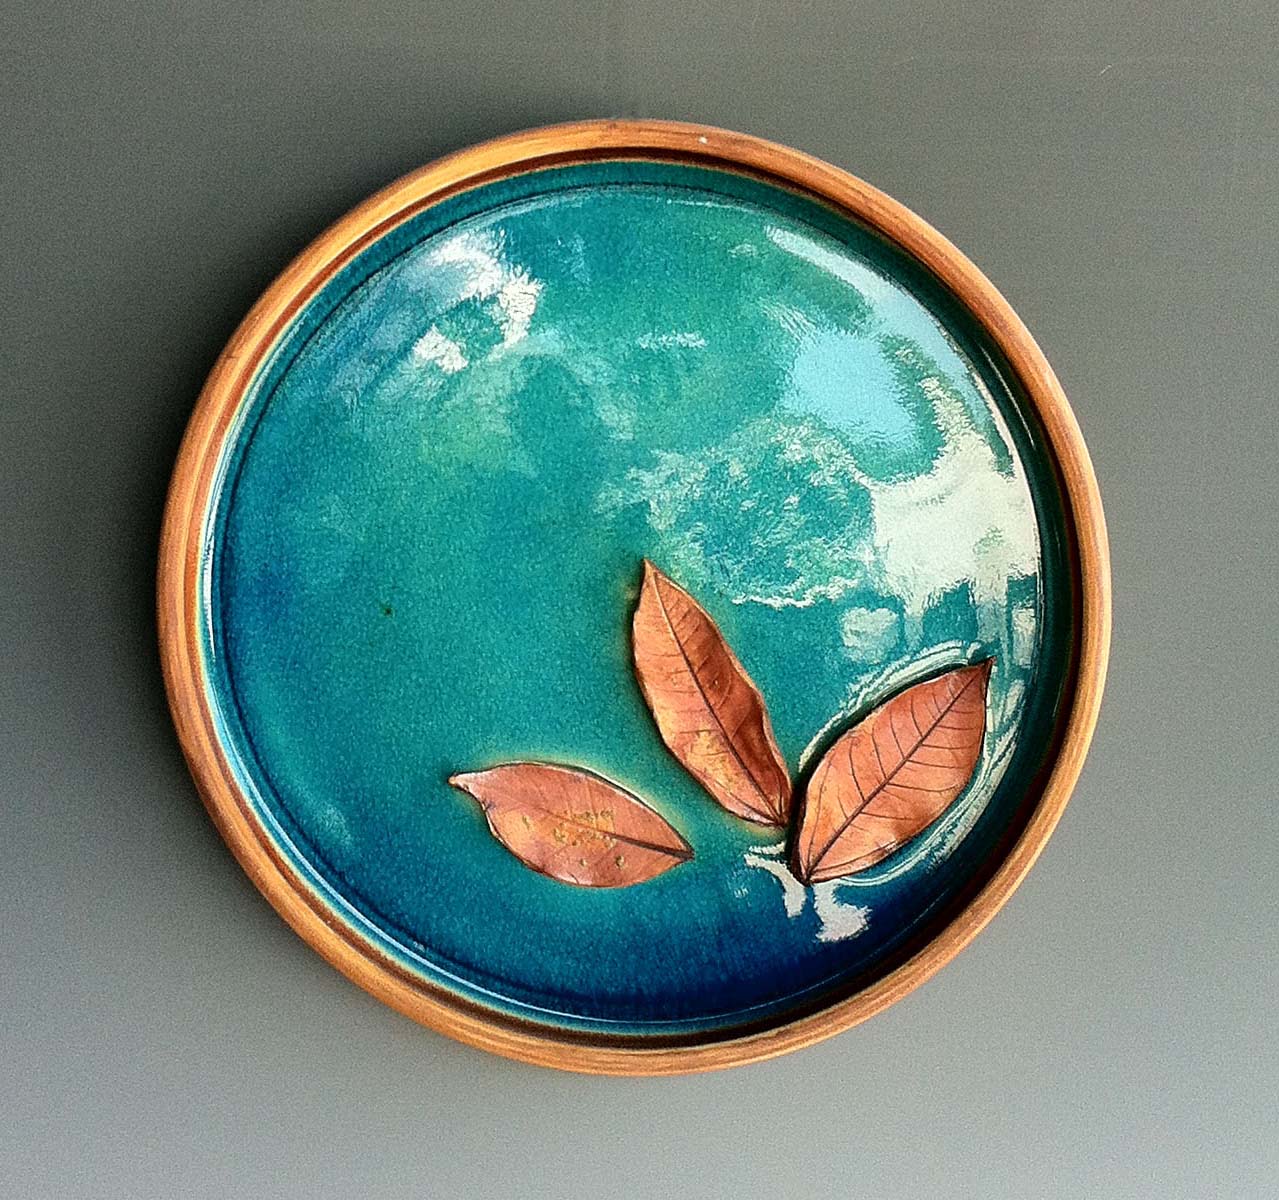 Stoneware Plater with Leaves